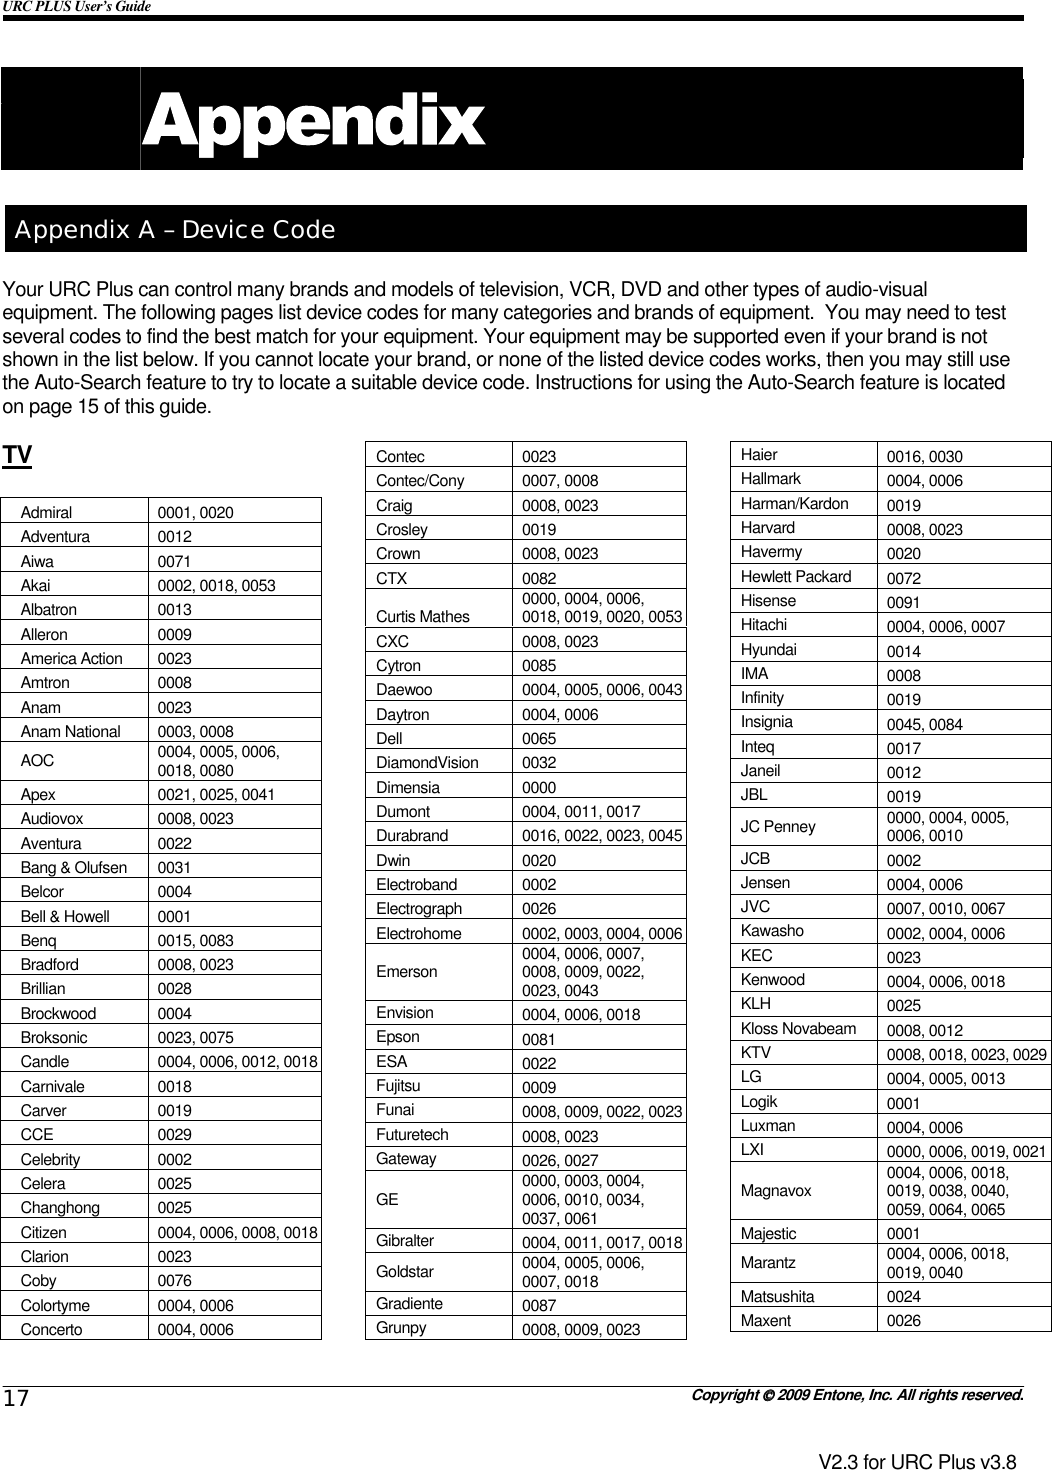 URC PLUS User’s Guide   Copyright  2009 Entone, Inc. All rights reserved. 17 V2.3 for URC Plus v3.8    Appendix A – Device Code Your URC Plus can control many brands and models of television, VCR, DVD and other types of audio-visual equipment. The following pages list device codes for many categories and brands of equipment.  You may need to test several codes to find the best match for your equipment. Your equipment may be supported even if your brand is not shown in the list below. If you cannot locate your brand, or none of the listed device codes works, then you may still use the Auto-Search feature to try to locate a suitable device code. Instructions for using the Auto-Search feature is located on page 15 of this guide.  TV  Admiral 0001, 0020 Adventura 0012 Aiwa 0071 Akai  0002, 0018, 0053 Albatron 0013 Alleron 0009 America Action  0023 Amtron 0008 Anam 0023 Anam National  0003, 0008 AOC  0004, 0005, 0006, 0018, 0080 Apex  0021, 0025, 0041  Audiovox 0008, 0023 Aventura 0022 Bang &amp; Olufsen  0031 Belcor 0004 Bell &amp; Howell  0001 Benq 0015, 0083 Bradford 0008, 0023 Brillian 0028 Brockwood 0004 Broksonic 0023, 0075 Candle  0004, 0006, 0012, 0018 Carnivale 0018 Carver 0019 CCE 0029 Celebrity 0002 Celera 0025 Changhong 0025 Citizen  0004, 0006, 0008, 0018 Clarion 0023 Coby 0076 Colortyme 0004, 0006 Concerto 0004, 0006 Contec 0023 Contec/Cony 0007, 0008 Craig 0008, 0023 Crosley 0019 Crown 0008, 0023 CTX 0082 Curtis Mathes  0000, 0004, 0006, 0018, 0019, 0020, 0053 CXC 0008, 0023 Cytron 0085 Daewoo  0004, 0005, 0006, 0043Daytron 0004, 0006 Dell 0065 DiamondVision 0032 Dimensia 0000 Dumont  0004, 0011, 0017  Durabrand  0016, 0022, 0023, 0045Dwin 0020 Electroband 0002 Electrograph 0026 Electrohome  0002, 0003, 0004, 0006Emerson  0004, 0006, 0007, 0008, 0009, 0022, 0023, 0043 Envision  0004, 0006, 0018  Epson  0081 ESA  0022 Fujitsu  0009 Funai  0008, 0009, 0022, 0023Futuretech  0008, 0023 Gateway  0026, 0027 GE  0000, 0003, 0004, 0006, 0010, 0034, 0037, 0061 Gibralter  0004, 0011, 0017, 0018Goldstar  0004, 0005, 0006, 0007, 0018  Gradiente  0087 Grunpy  0008, 0009, 0023  Haier  0016, 0030 Hallmark  0004, 0006 Harman/Kardon  0019 Harvard  0008, 0023 Havermy  0020 Hewlett Packard  0072 Hisense  0091 Hitachi  0004, 0006, 0007  Hyundai  0014 IMA  0008 Infinity  0019 Insignia  0045, 0084 Inteq  0017 Janeil  0012 JBL  0019 JC Penney  0000, 0004, 0005, 0006, 0010 JCB  0002 Jensen  0004, 0006 JVC  0007, 0010, 0067  Kawasho  0002, 0004, 0006  KEC  0023 Kenwood  0004, 0006, 0018  KLH  0025 Kloss Novabeam  0008, 0012 KTV  0008, 0018, 0023, 0029LG  0004, 0005, 0013  Logik  0001 Luxman  0004, 0006 LXI  0000, 0006, 0019, 0021Magnavox  0004, 0006, 0018, 0019, 0038, 0040, 0059, 0064, 0065 Majestic 0001 Marantz  0004, 0006, 0018, 0019, 0040  Matsushita 0024 Maxent 0026 